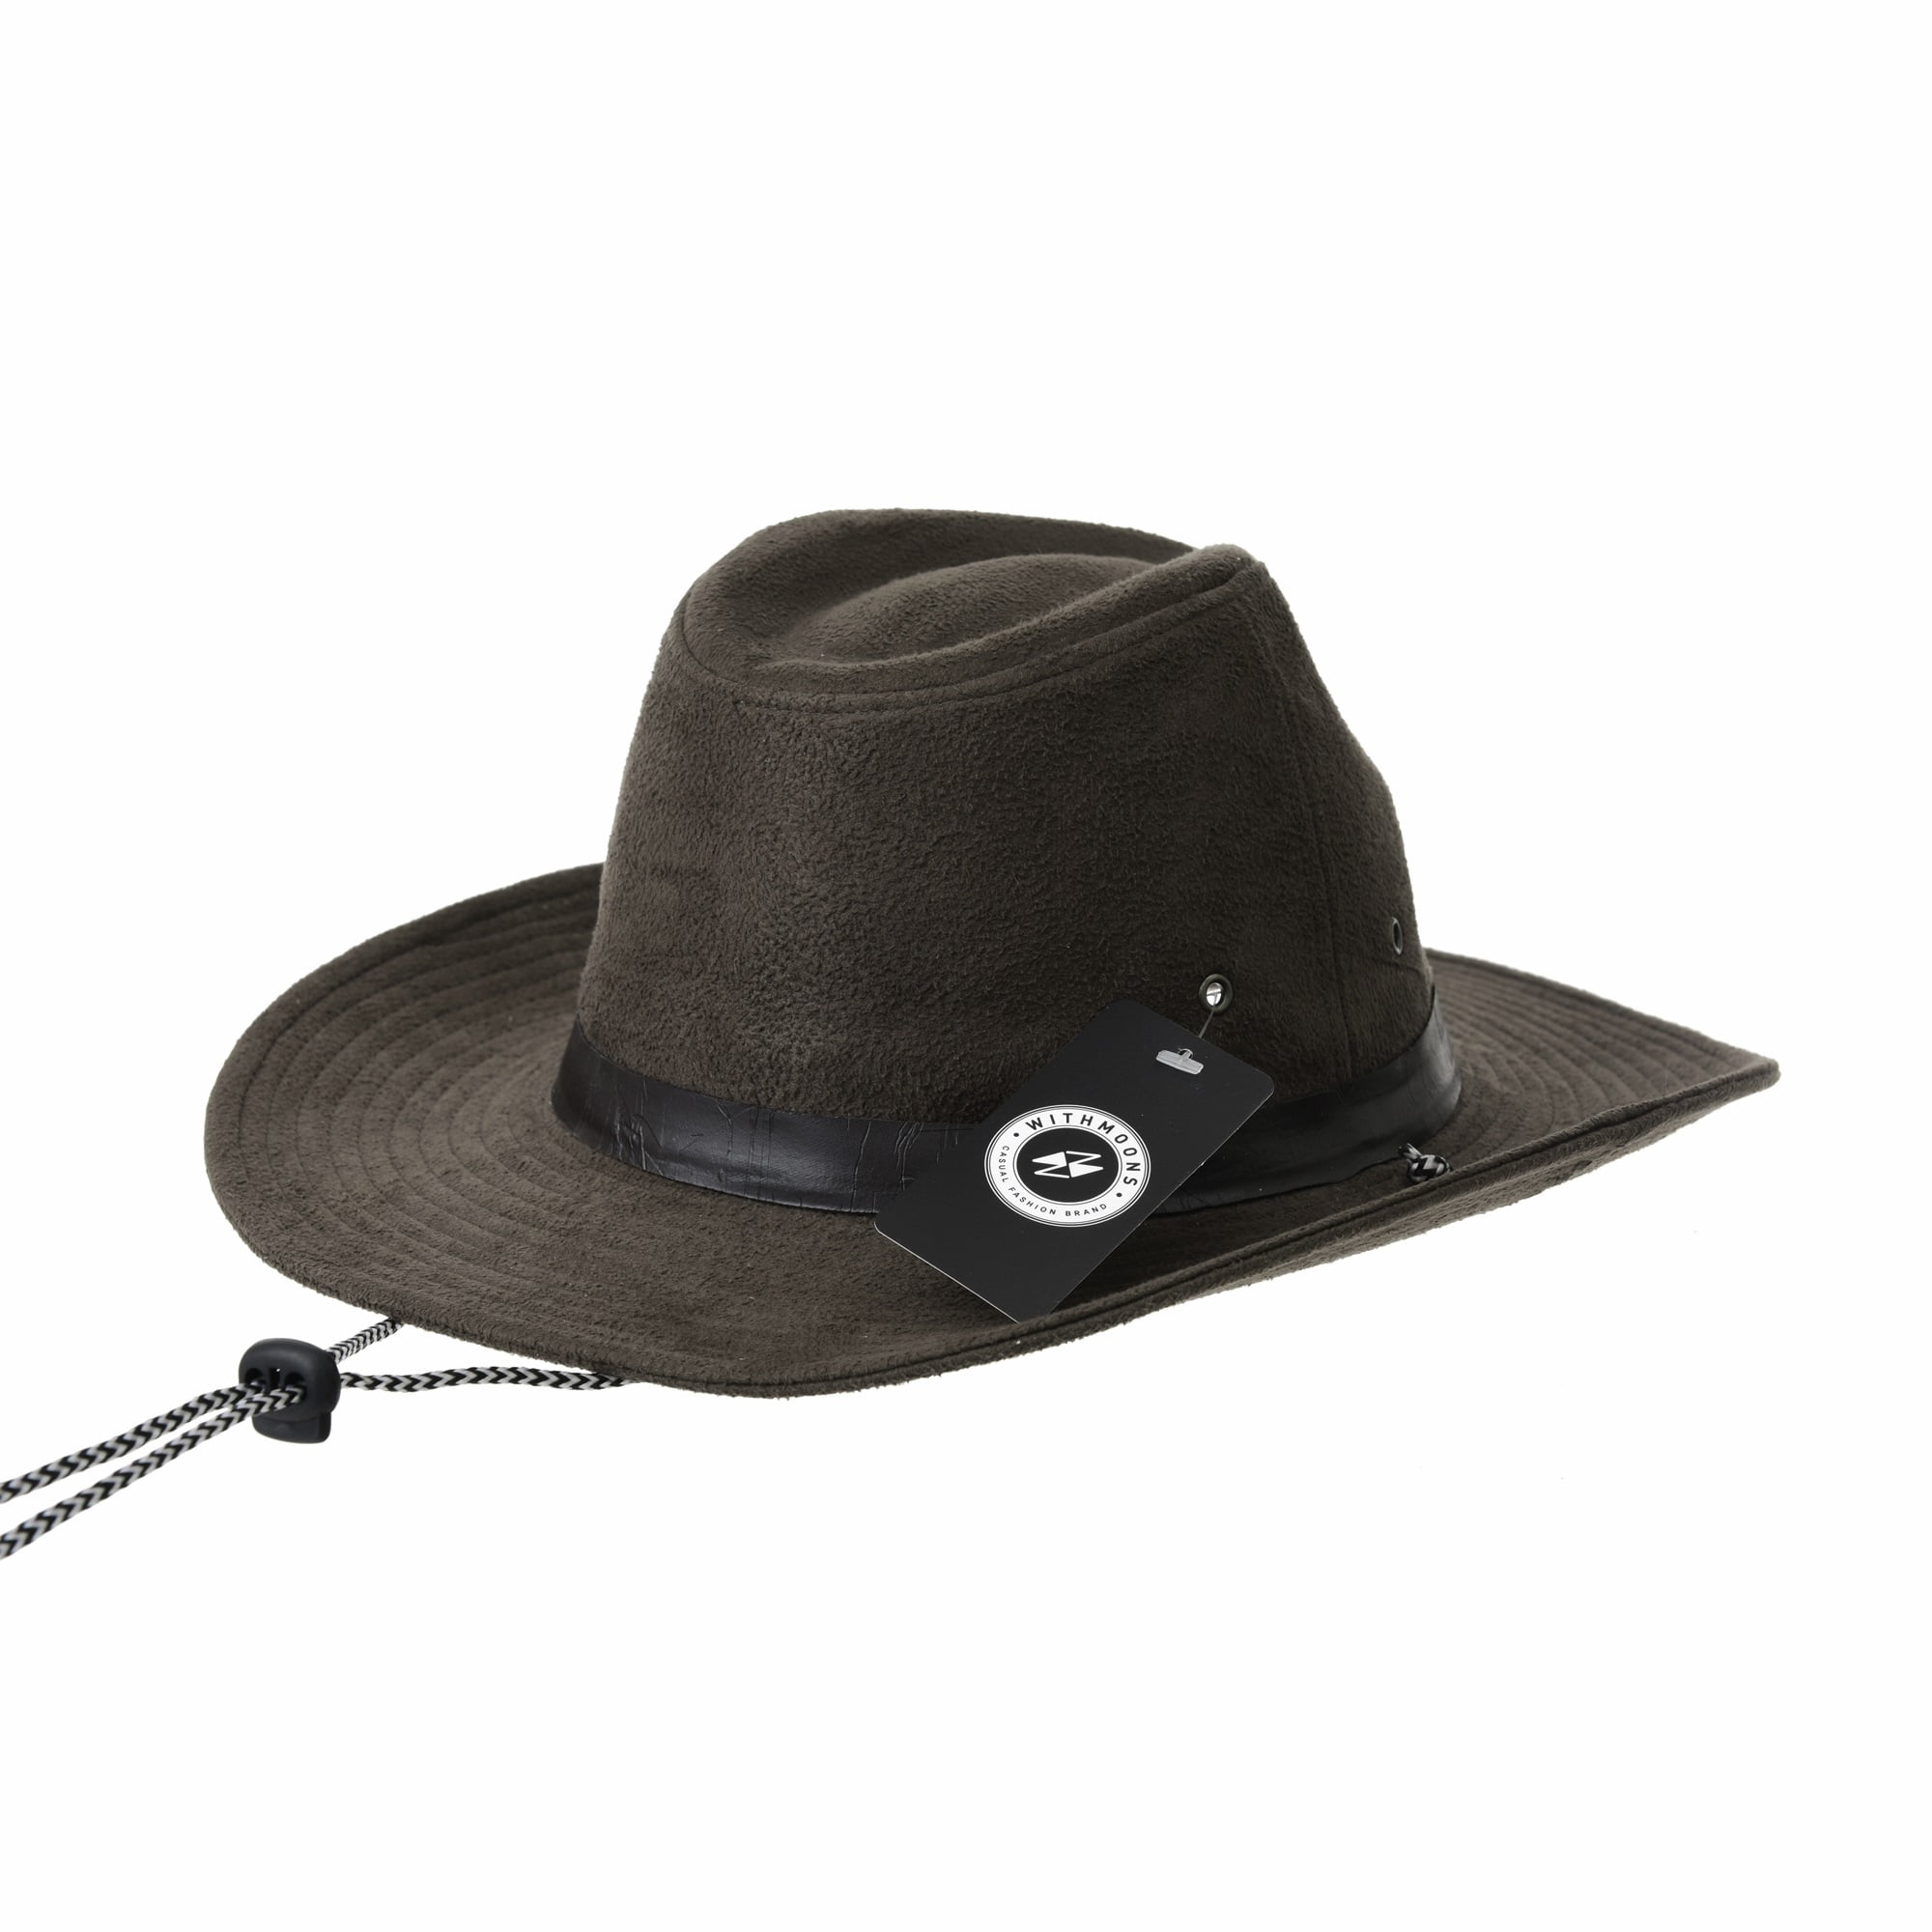 WITHMOONS Suede Indiana Jones Hat Outback Hat Fedora with Cord CD8858